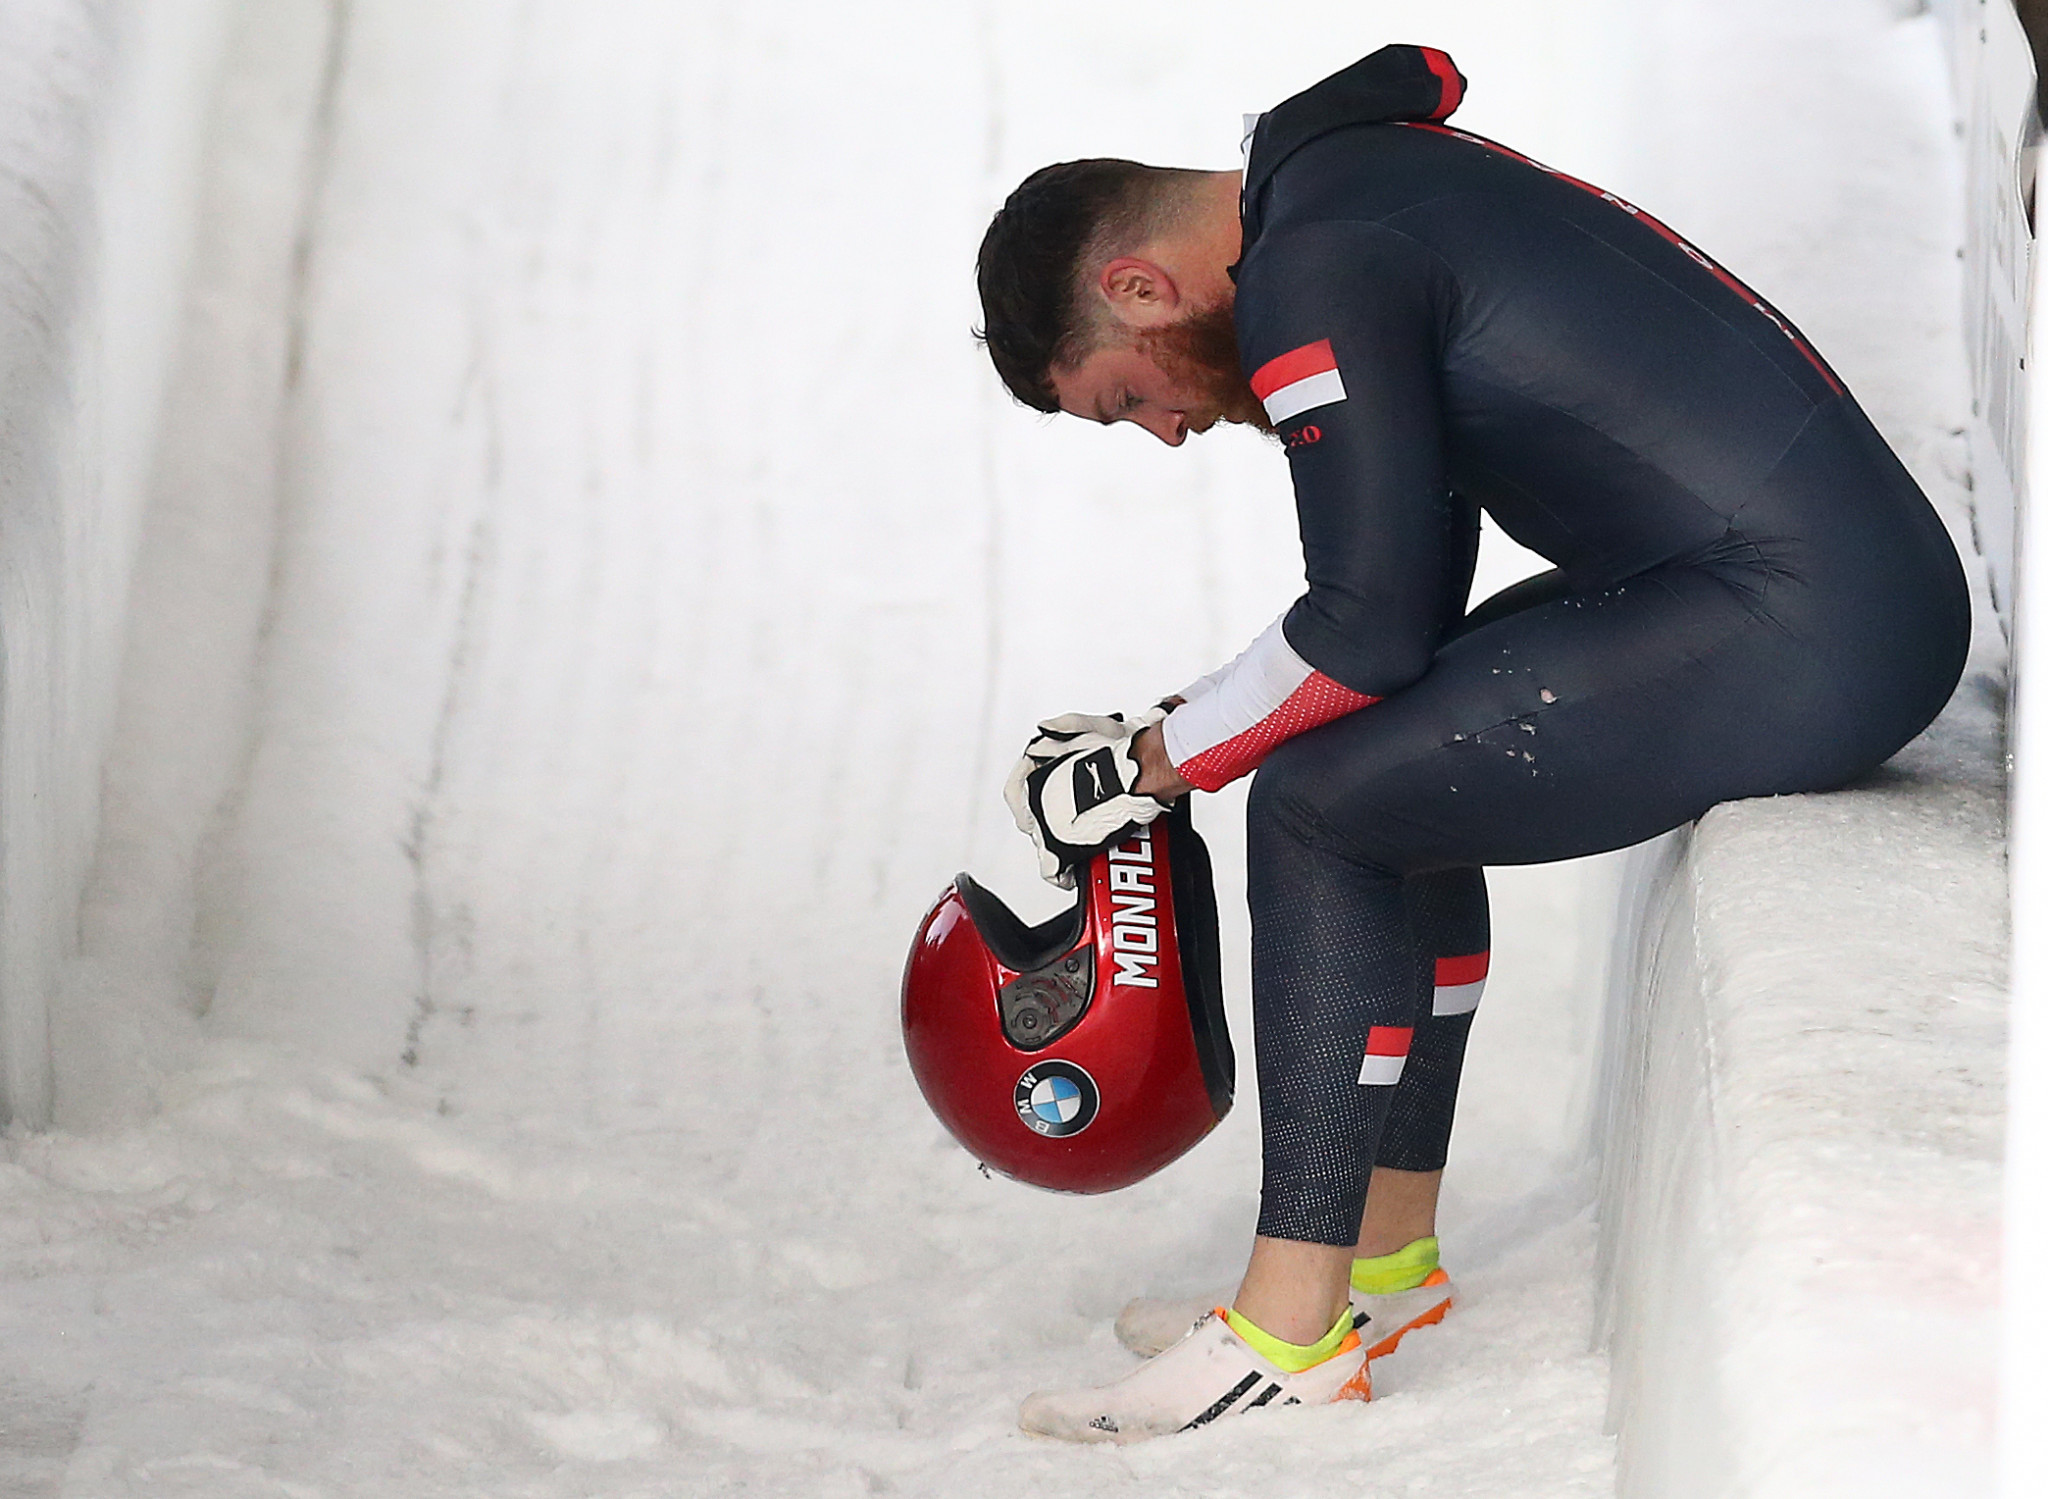 Monaco led at the halfway stage of the men's four-man bobsleigh but crashed on the second run ©Getty Images